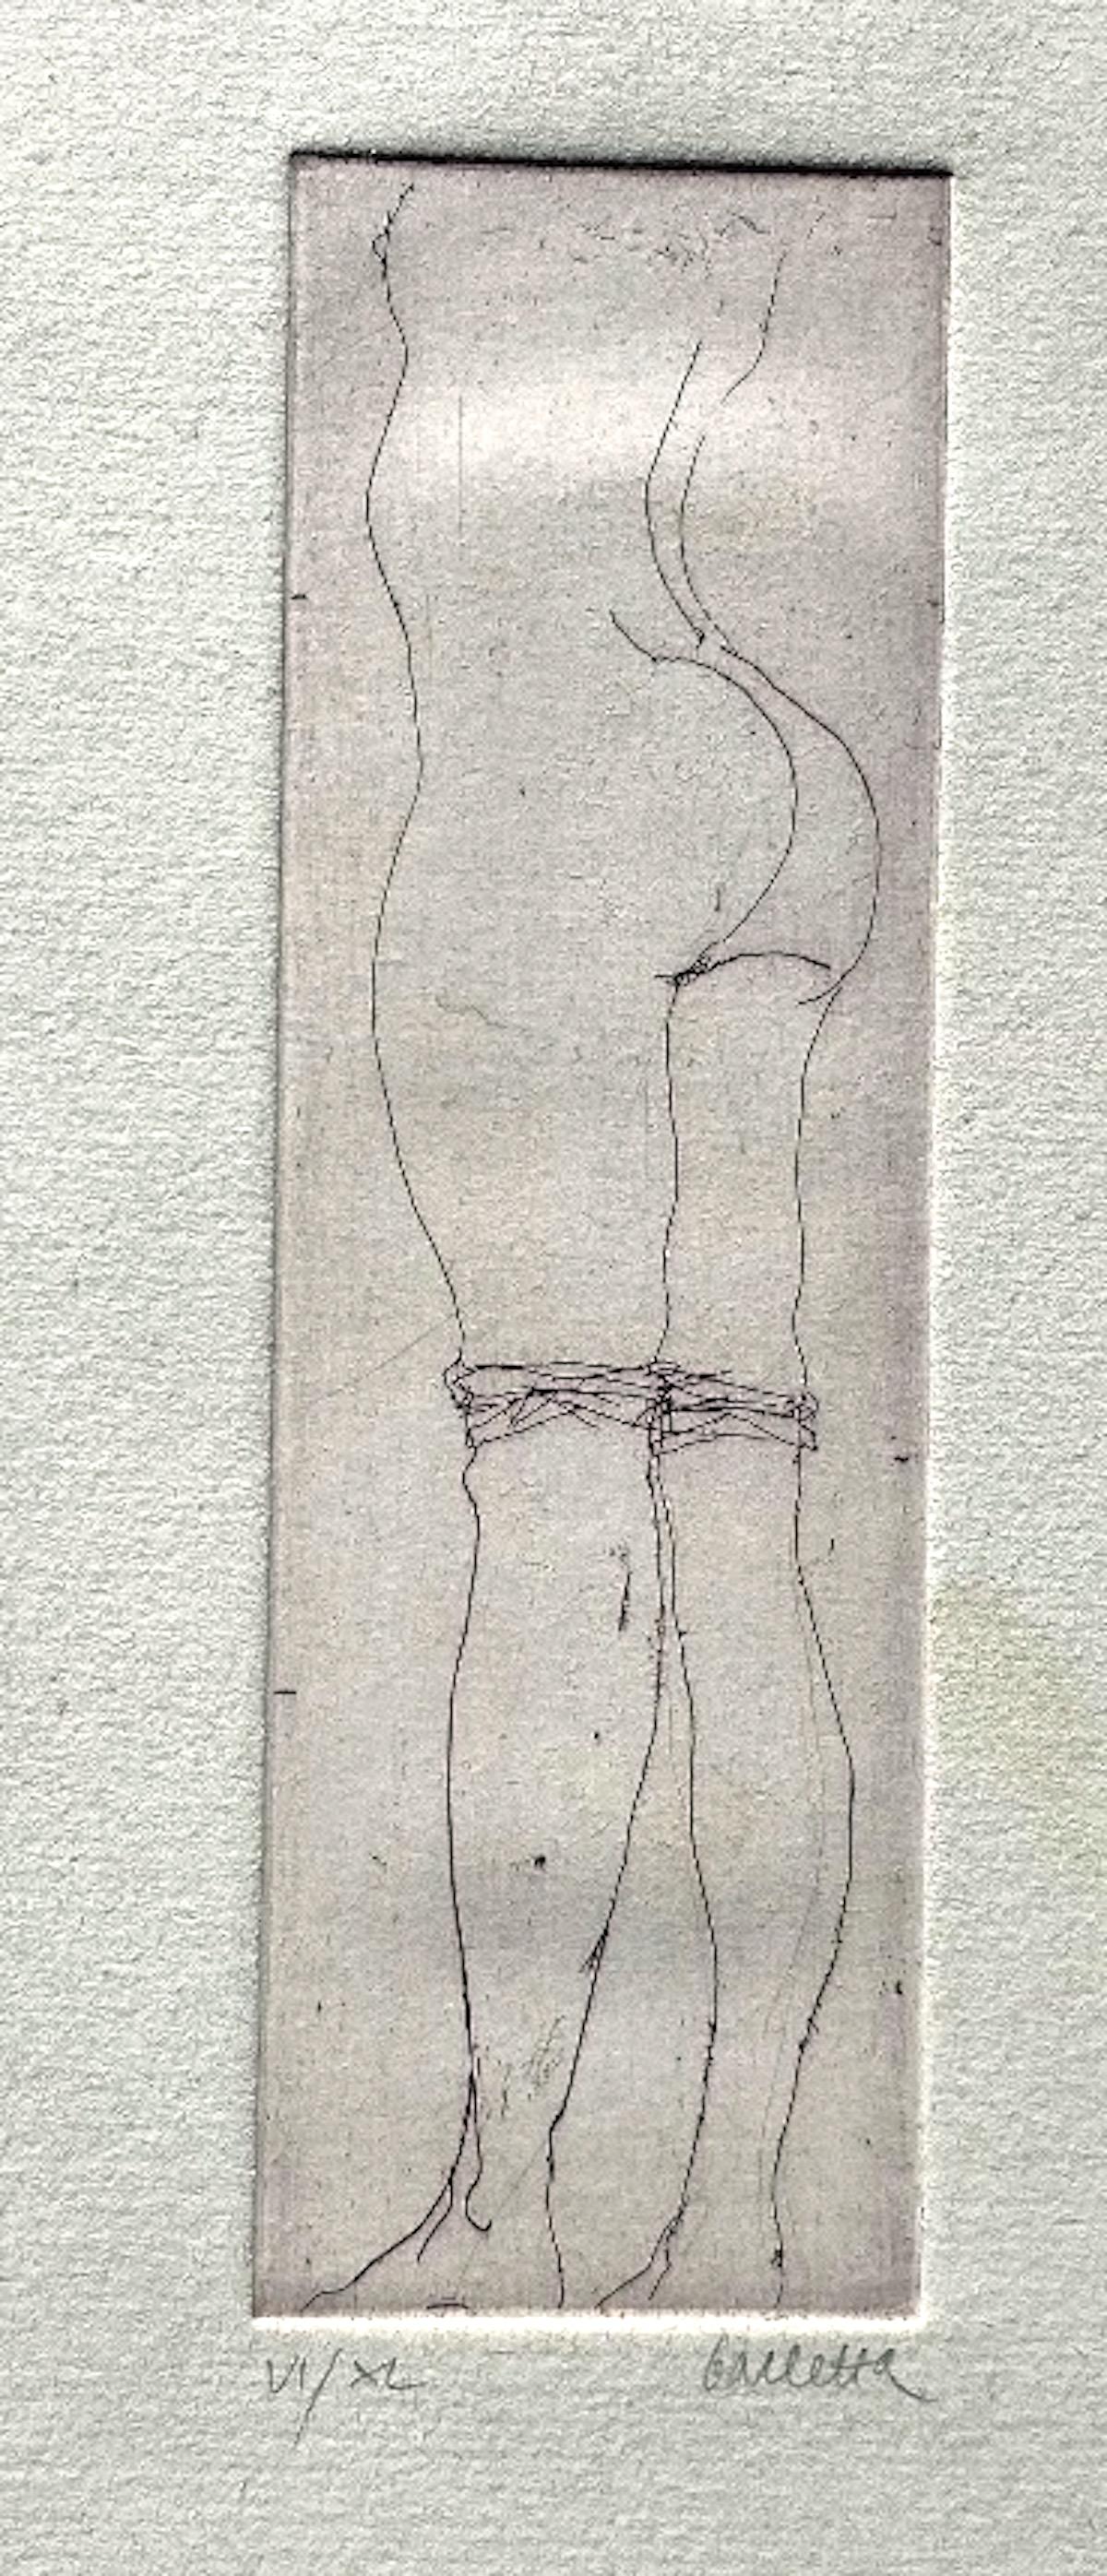 Nude is an original etching, realized by Sergio Barletta in 1970s.

Hand-signed on the lower right. Numbered, VI/XL prints, on the lower left.

In good conditions.

Sergio Barletta (1934) is an Italian cartoonist and illustrator, who has also